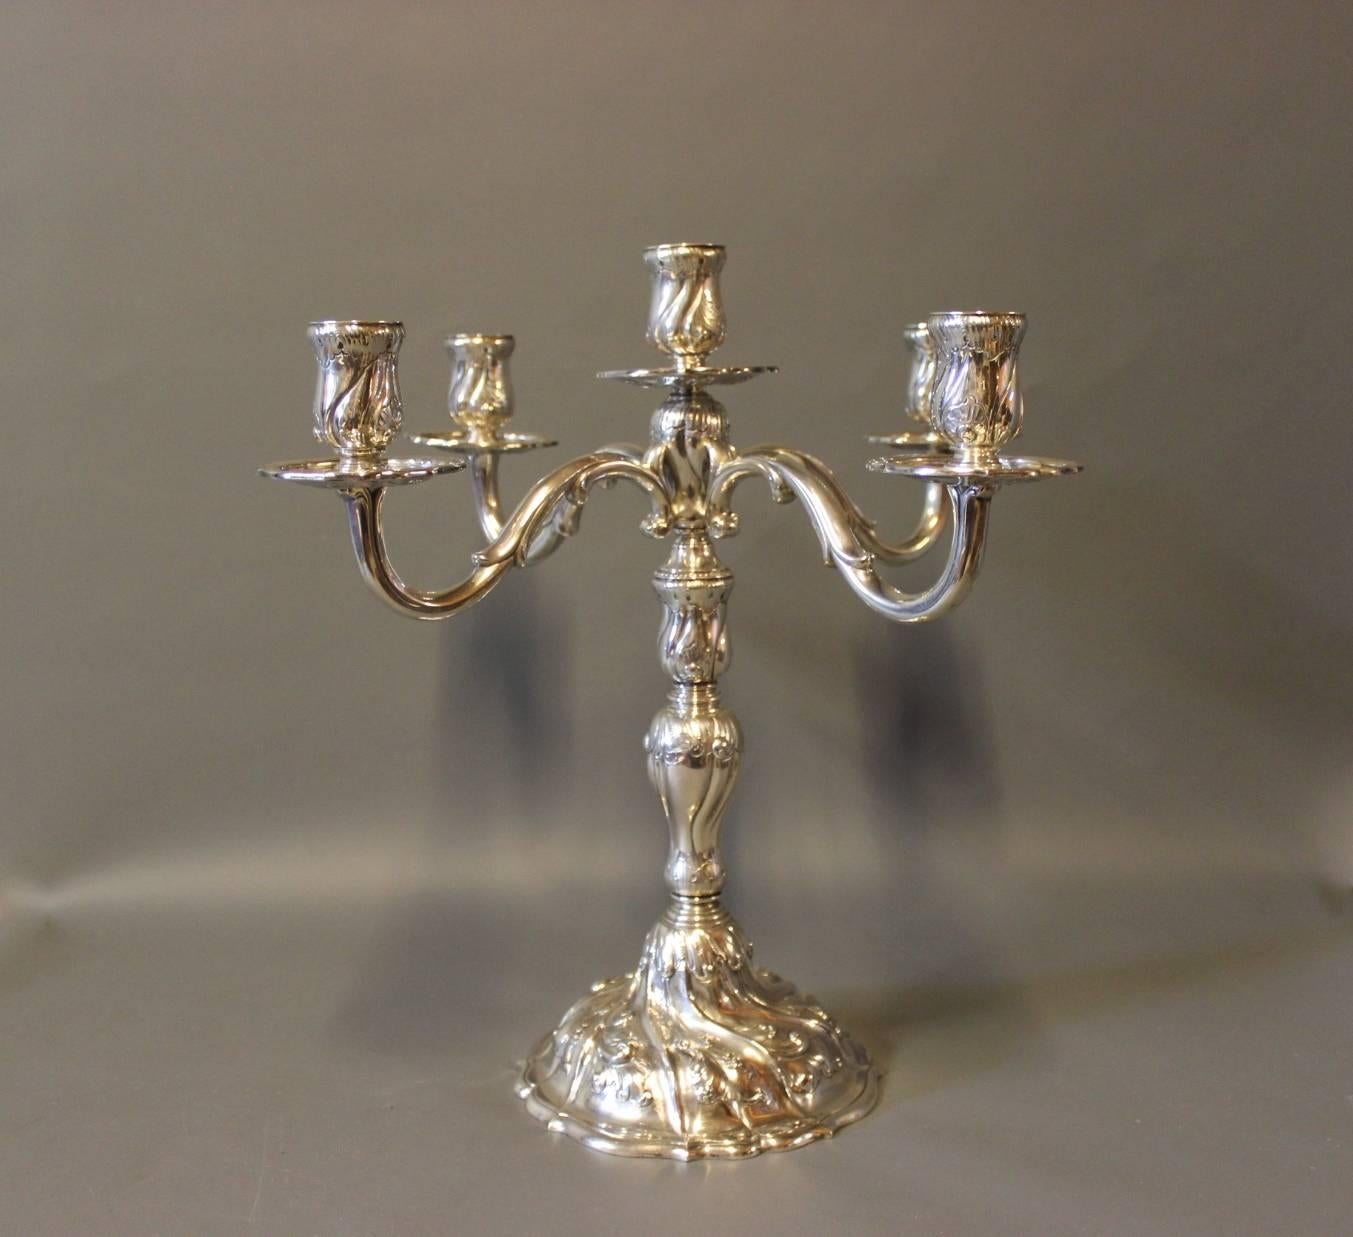 Other Pair of Five Armed Candelabra in 925 Sterling Silver by English Silver House